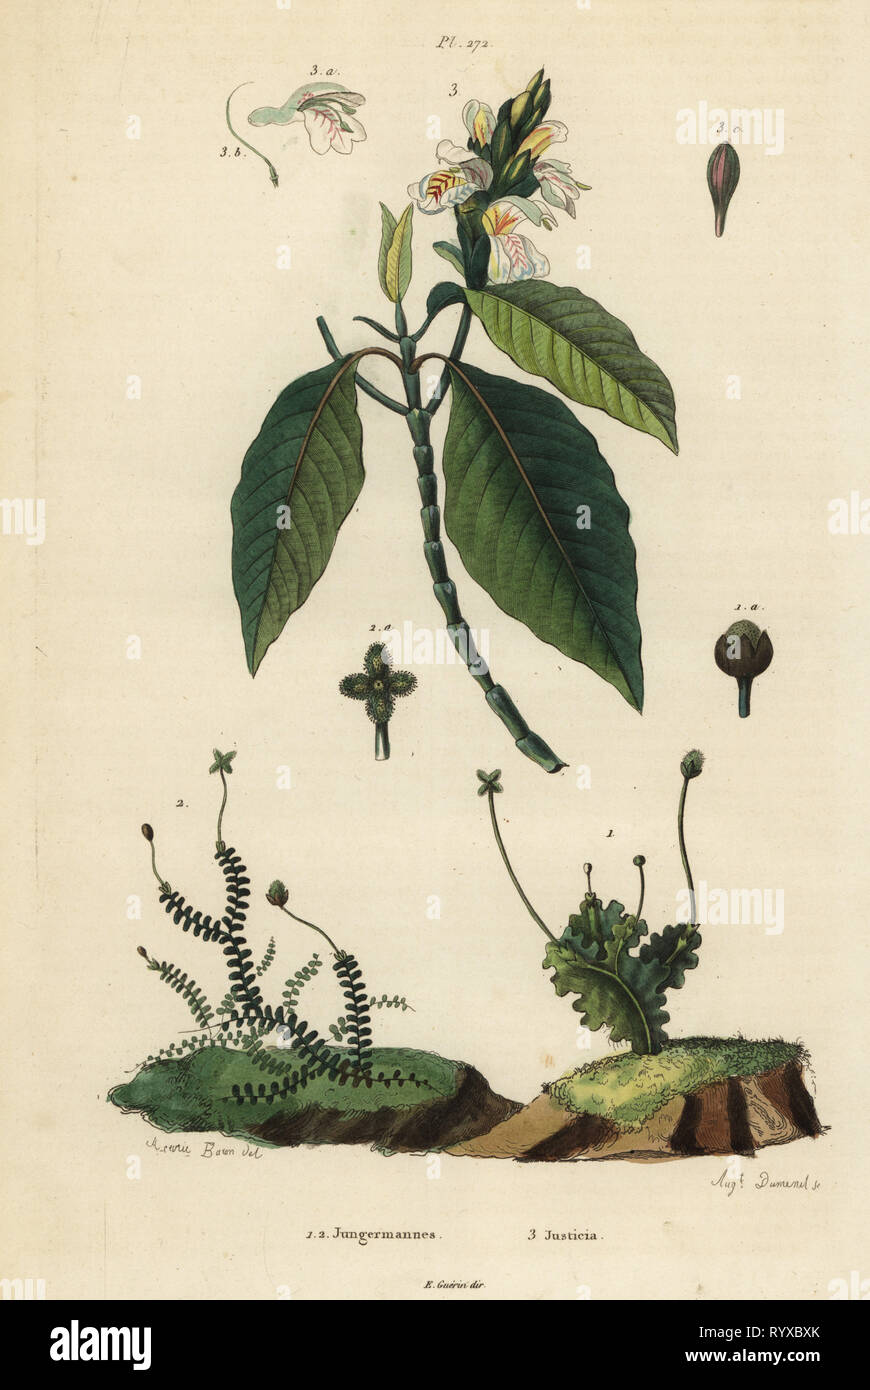 Leafy liverworts, Jungermannia epiphylla 1 and Jungermannia asplenoides 2, and Malabar nut or adulsa, Justicia adhatoda 3. Jungermannes, Justicia. Handcoloured steel engraving by August Dumenil after an illustration by A. Carie Baron from Felix-Edouard Guerin-Meneville's Dictionnaire Pittoresque d'Histoire Naturelle (Picturesque Dictionary of Natural History), Paris, 1834-39. Stock Photo